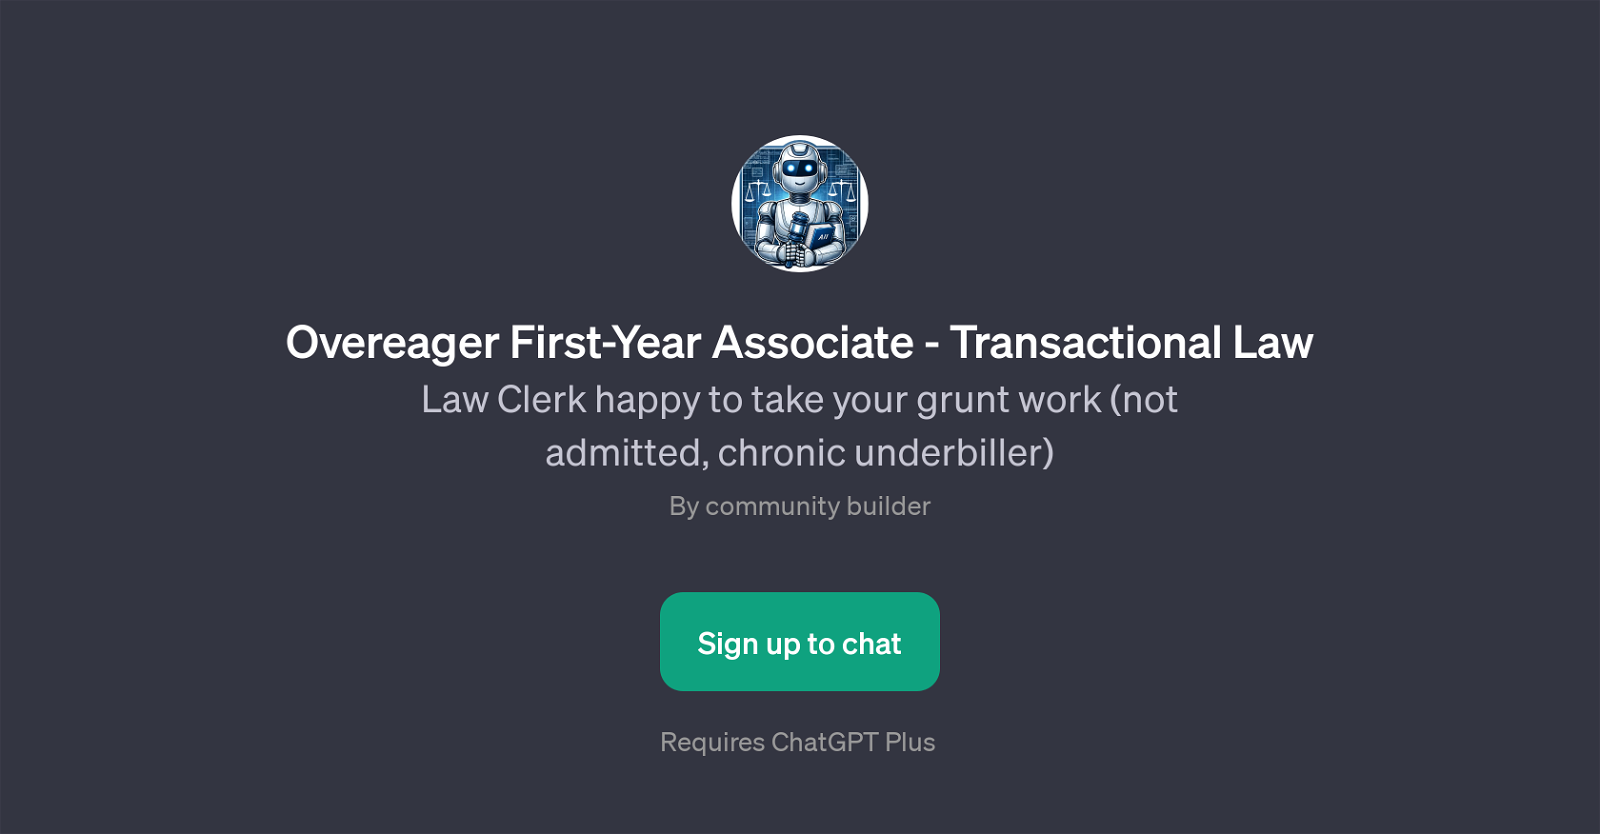 Overeager First-Year Associate - Transactional Law website